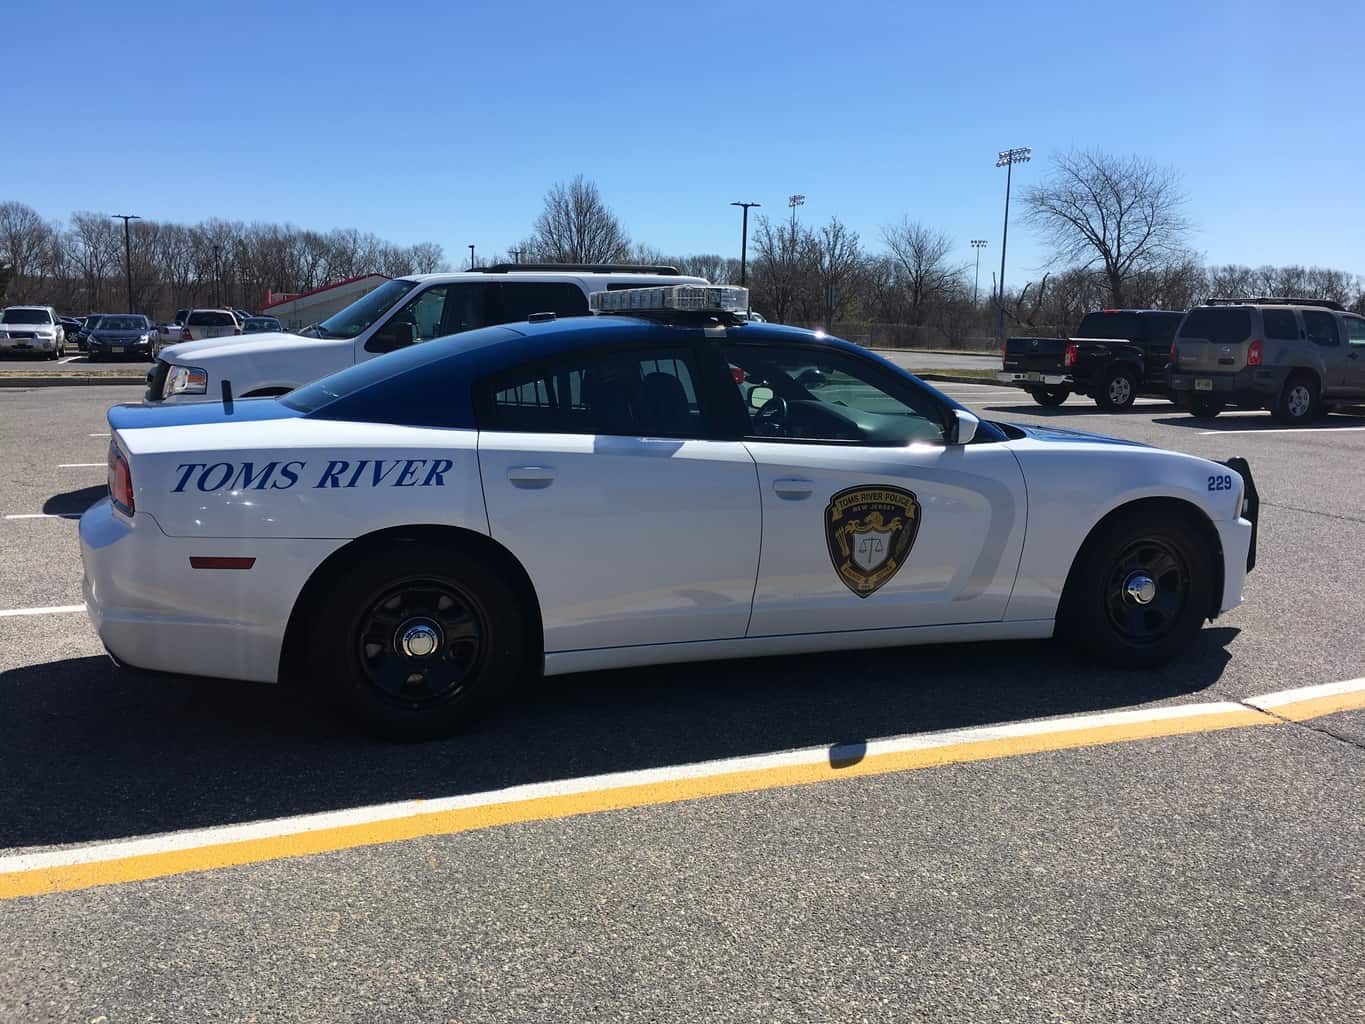 Armed Officers To Be In Every Toms River Township School1365 x 1024